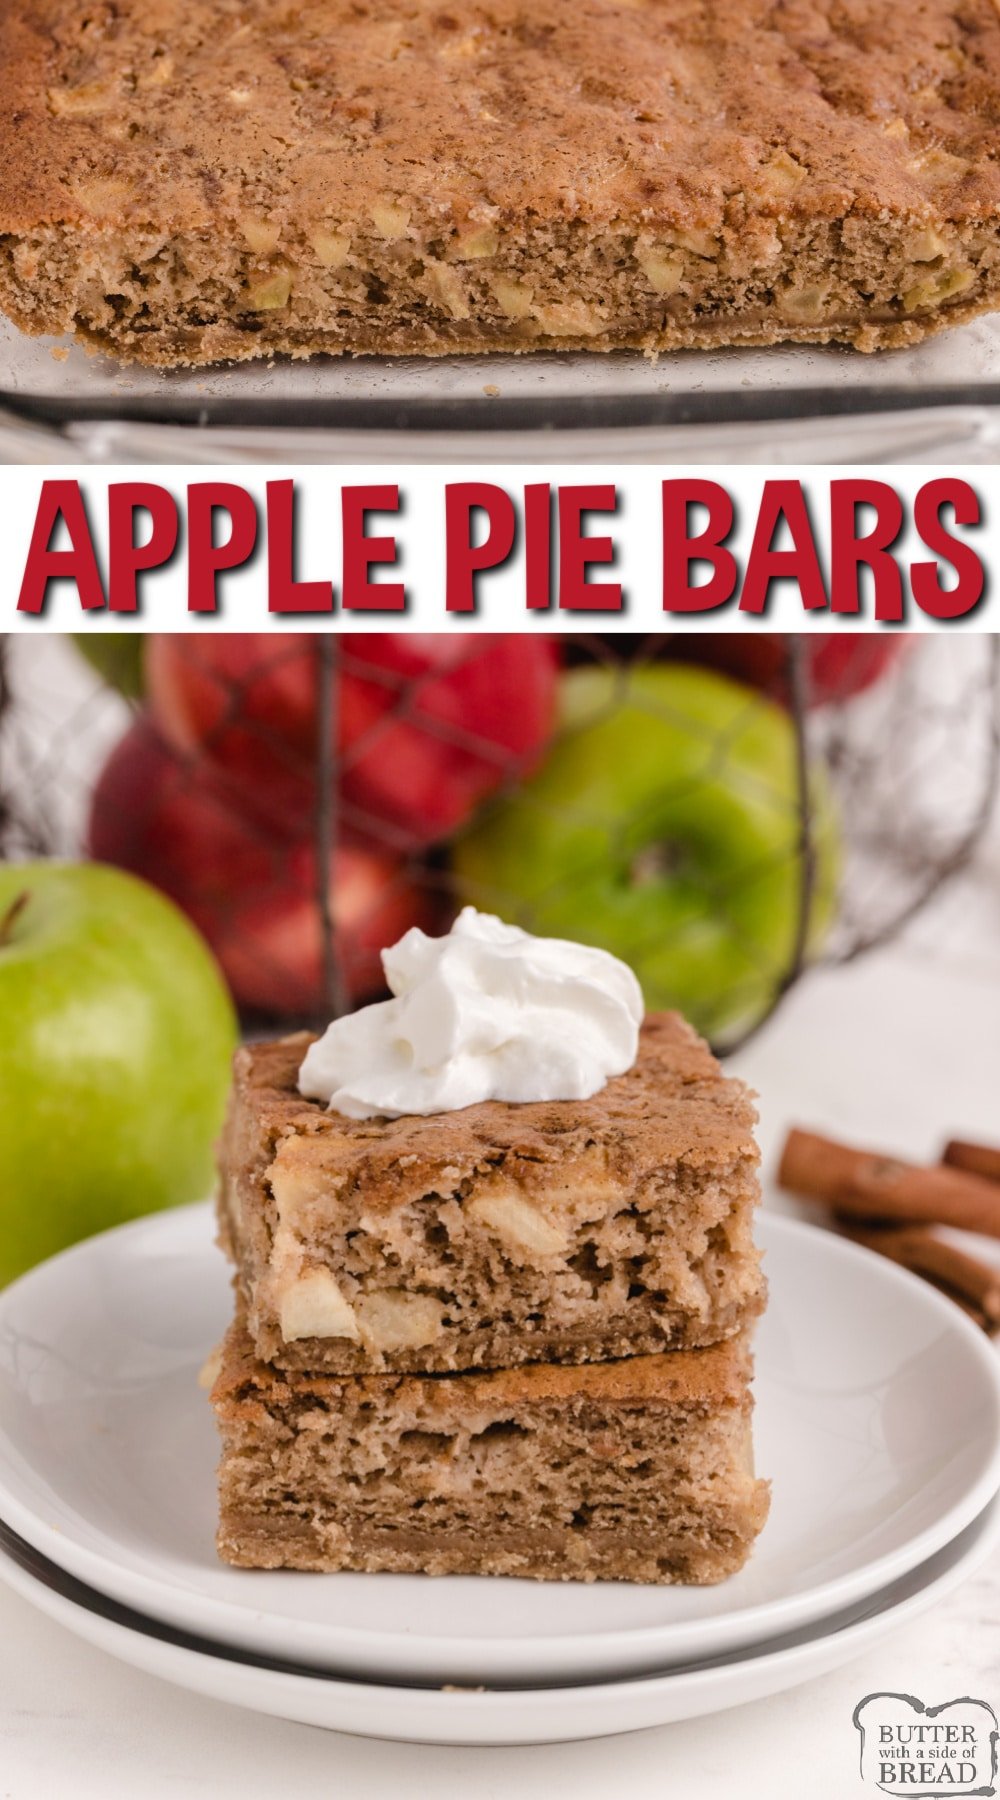 Sour Cream Apple Pie Bars are almost like a pie, almost like a cookie, but absolutely delicious! Made with fresh apples, sour cream and a few other basic ingredients, this just might be your new favorite apple dessert!